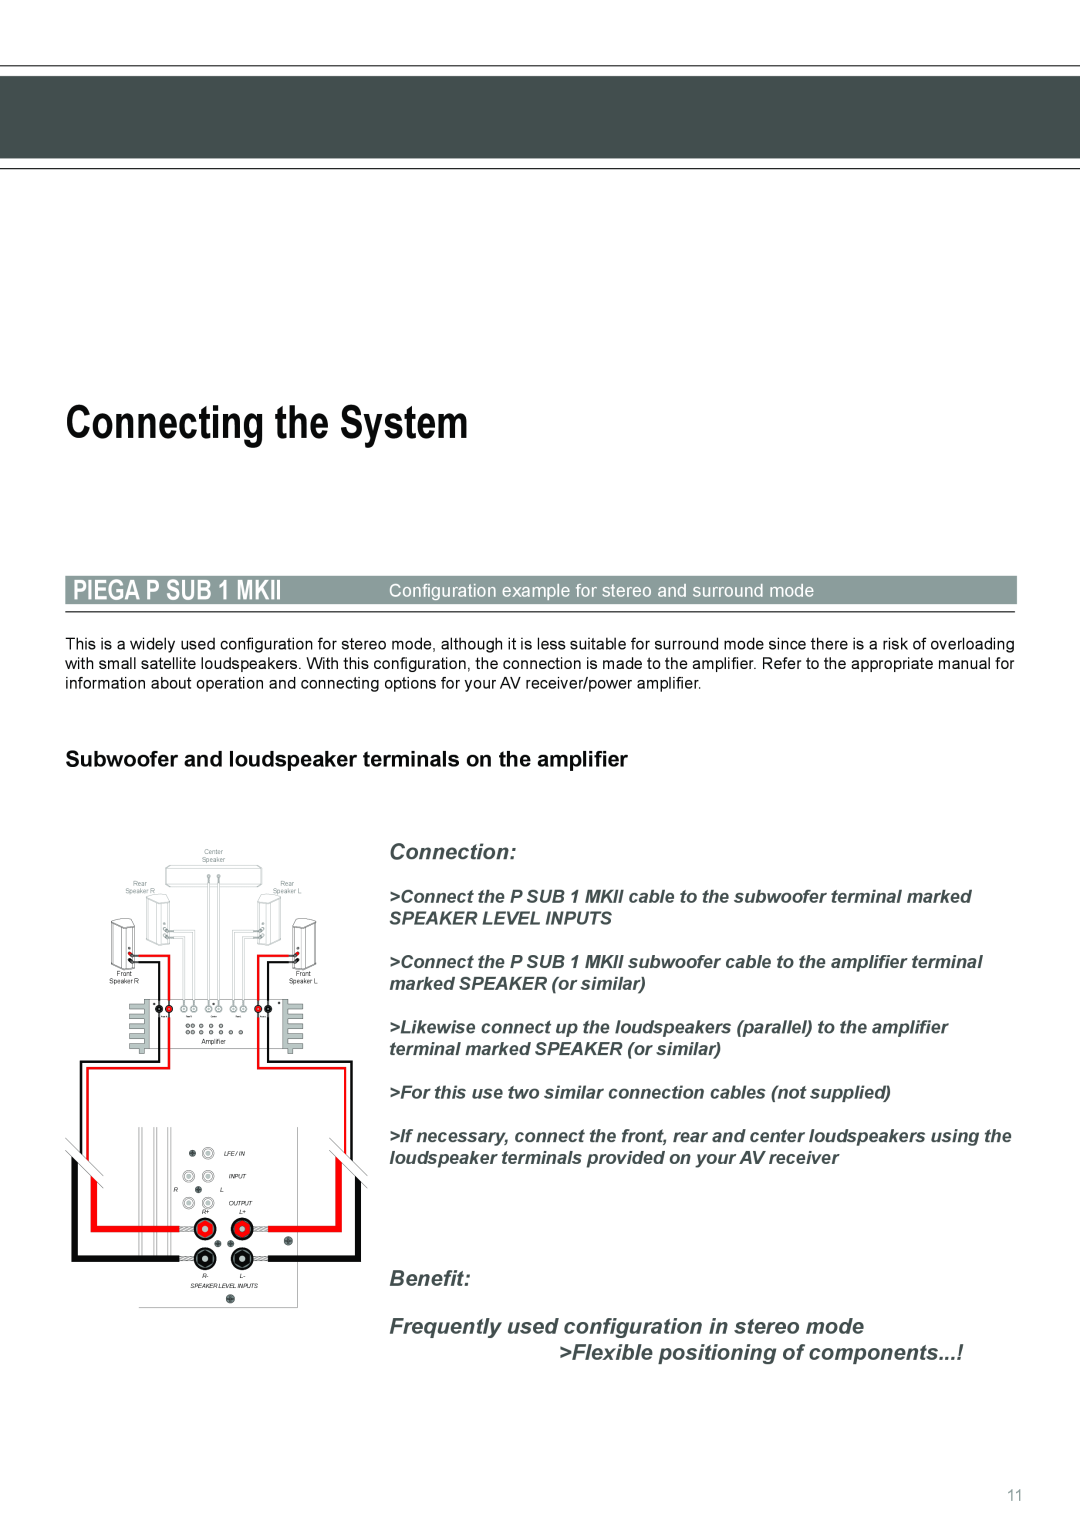 Piega user manual Connecting the System, PIEGA P SUB 1 MKII, Connection, Benefit 